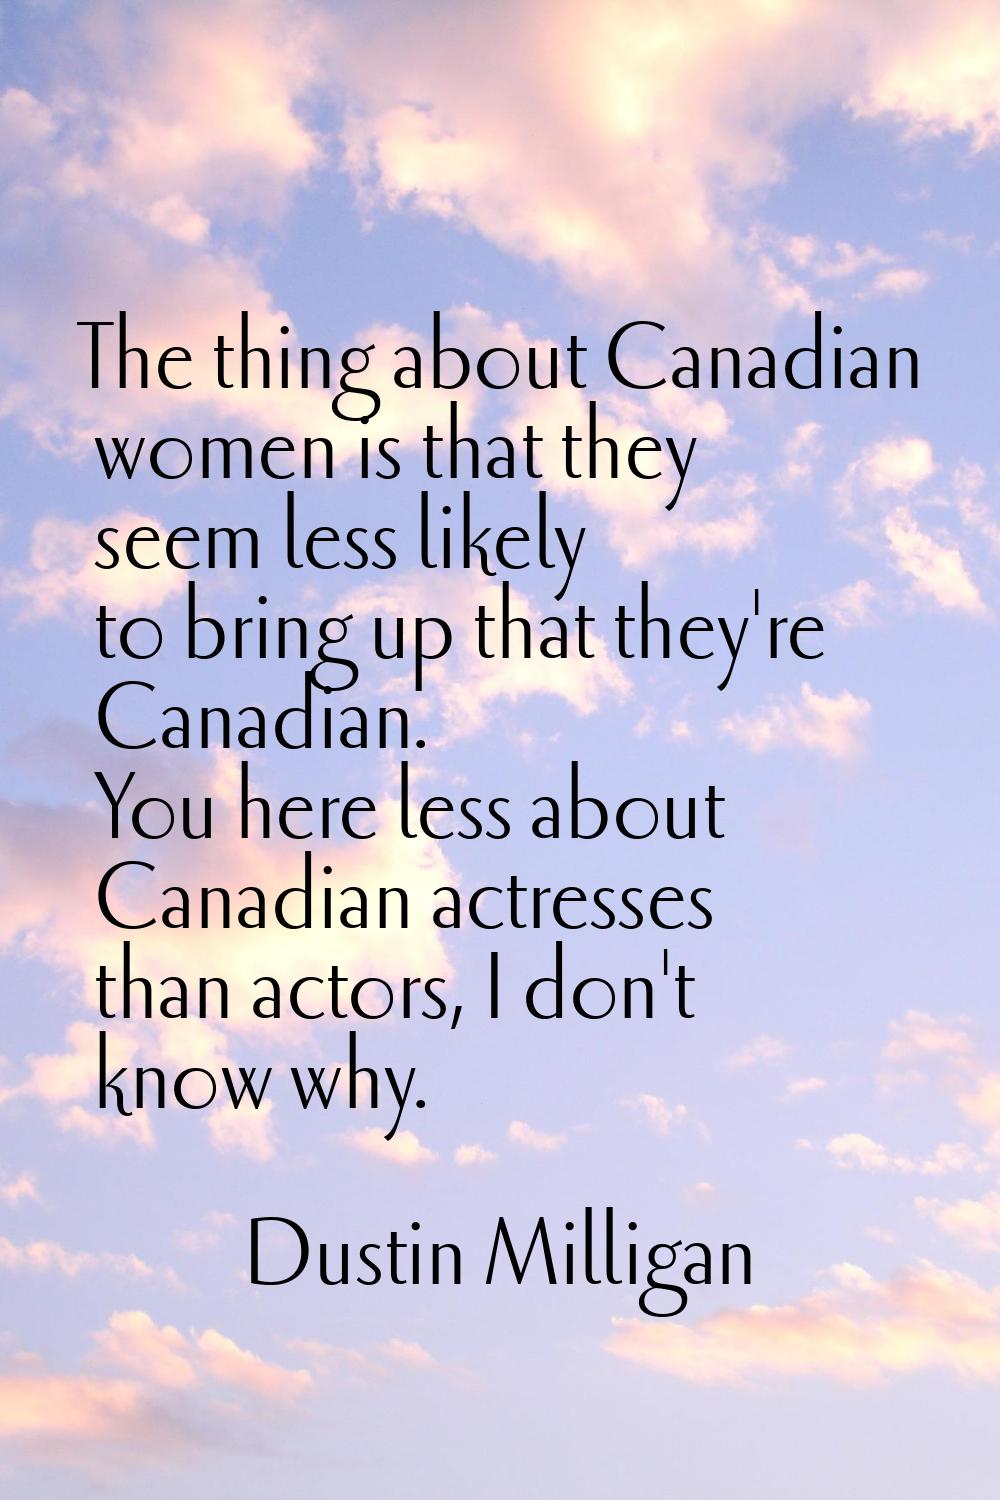 The thing about Canadian women is that they seem less likely to bring up that they're Canadian. You